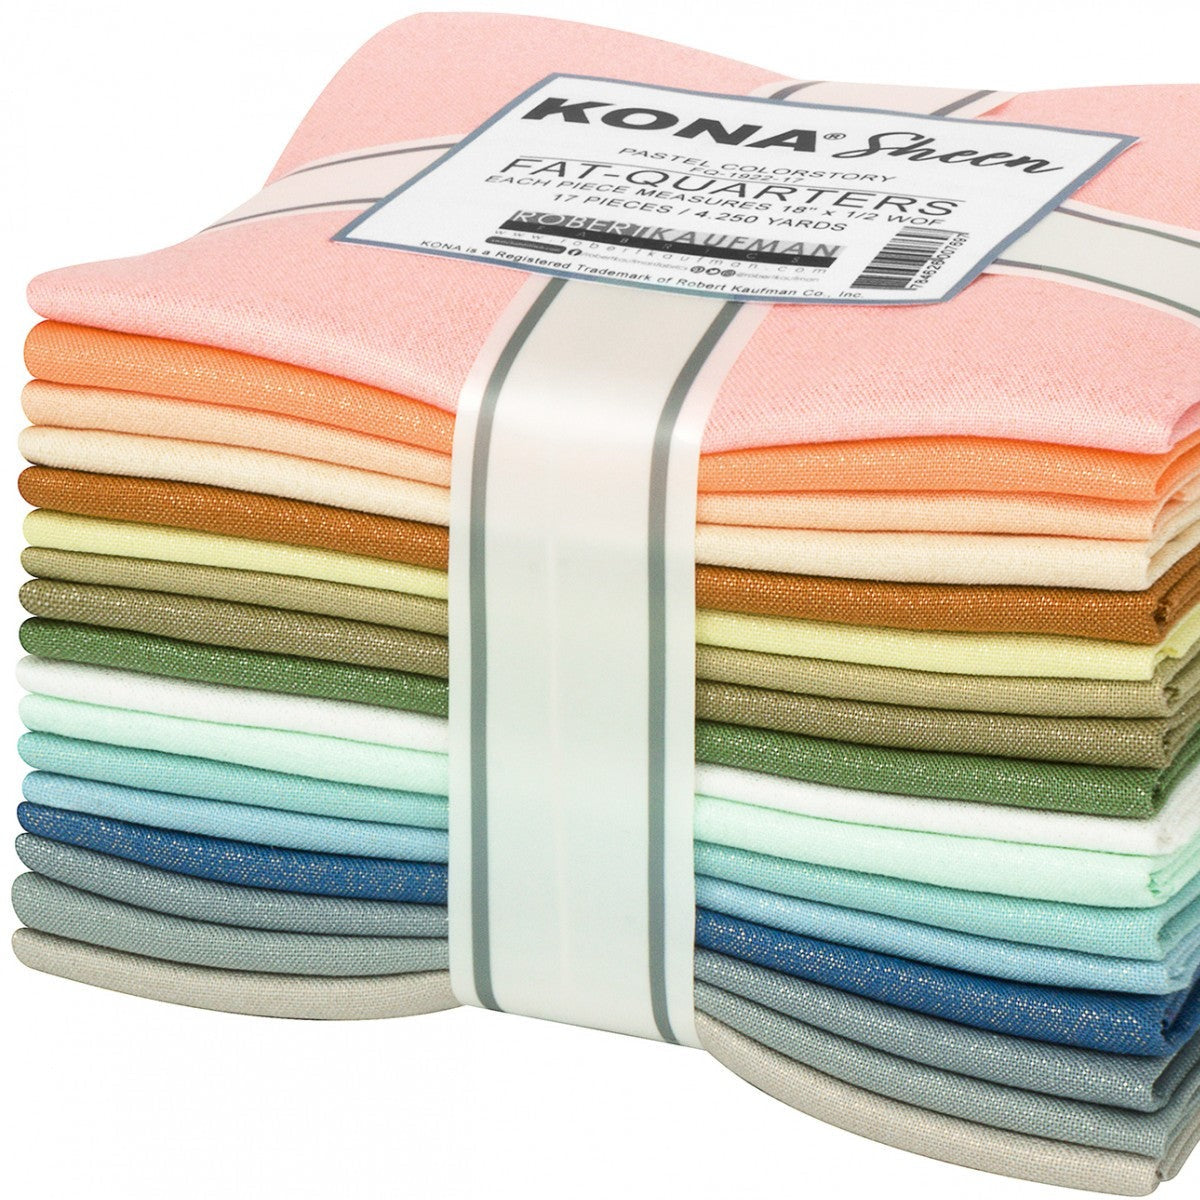 This factory cut FAT QUARTER BUNDLE contains 17 cotton fabrics from Kona Solids - Sheen for Robert Kaufman Fabrics.    Manufacturer: Robert Kaufman Fabrics Collection: Kona Cotton Solids Sheen Material: 100% Cotton  SKU: FQ-1922-17 Weight: Quilting 